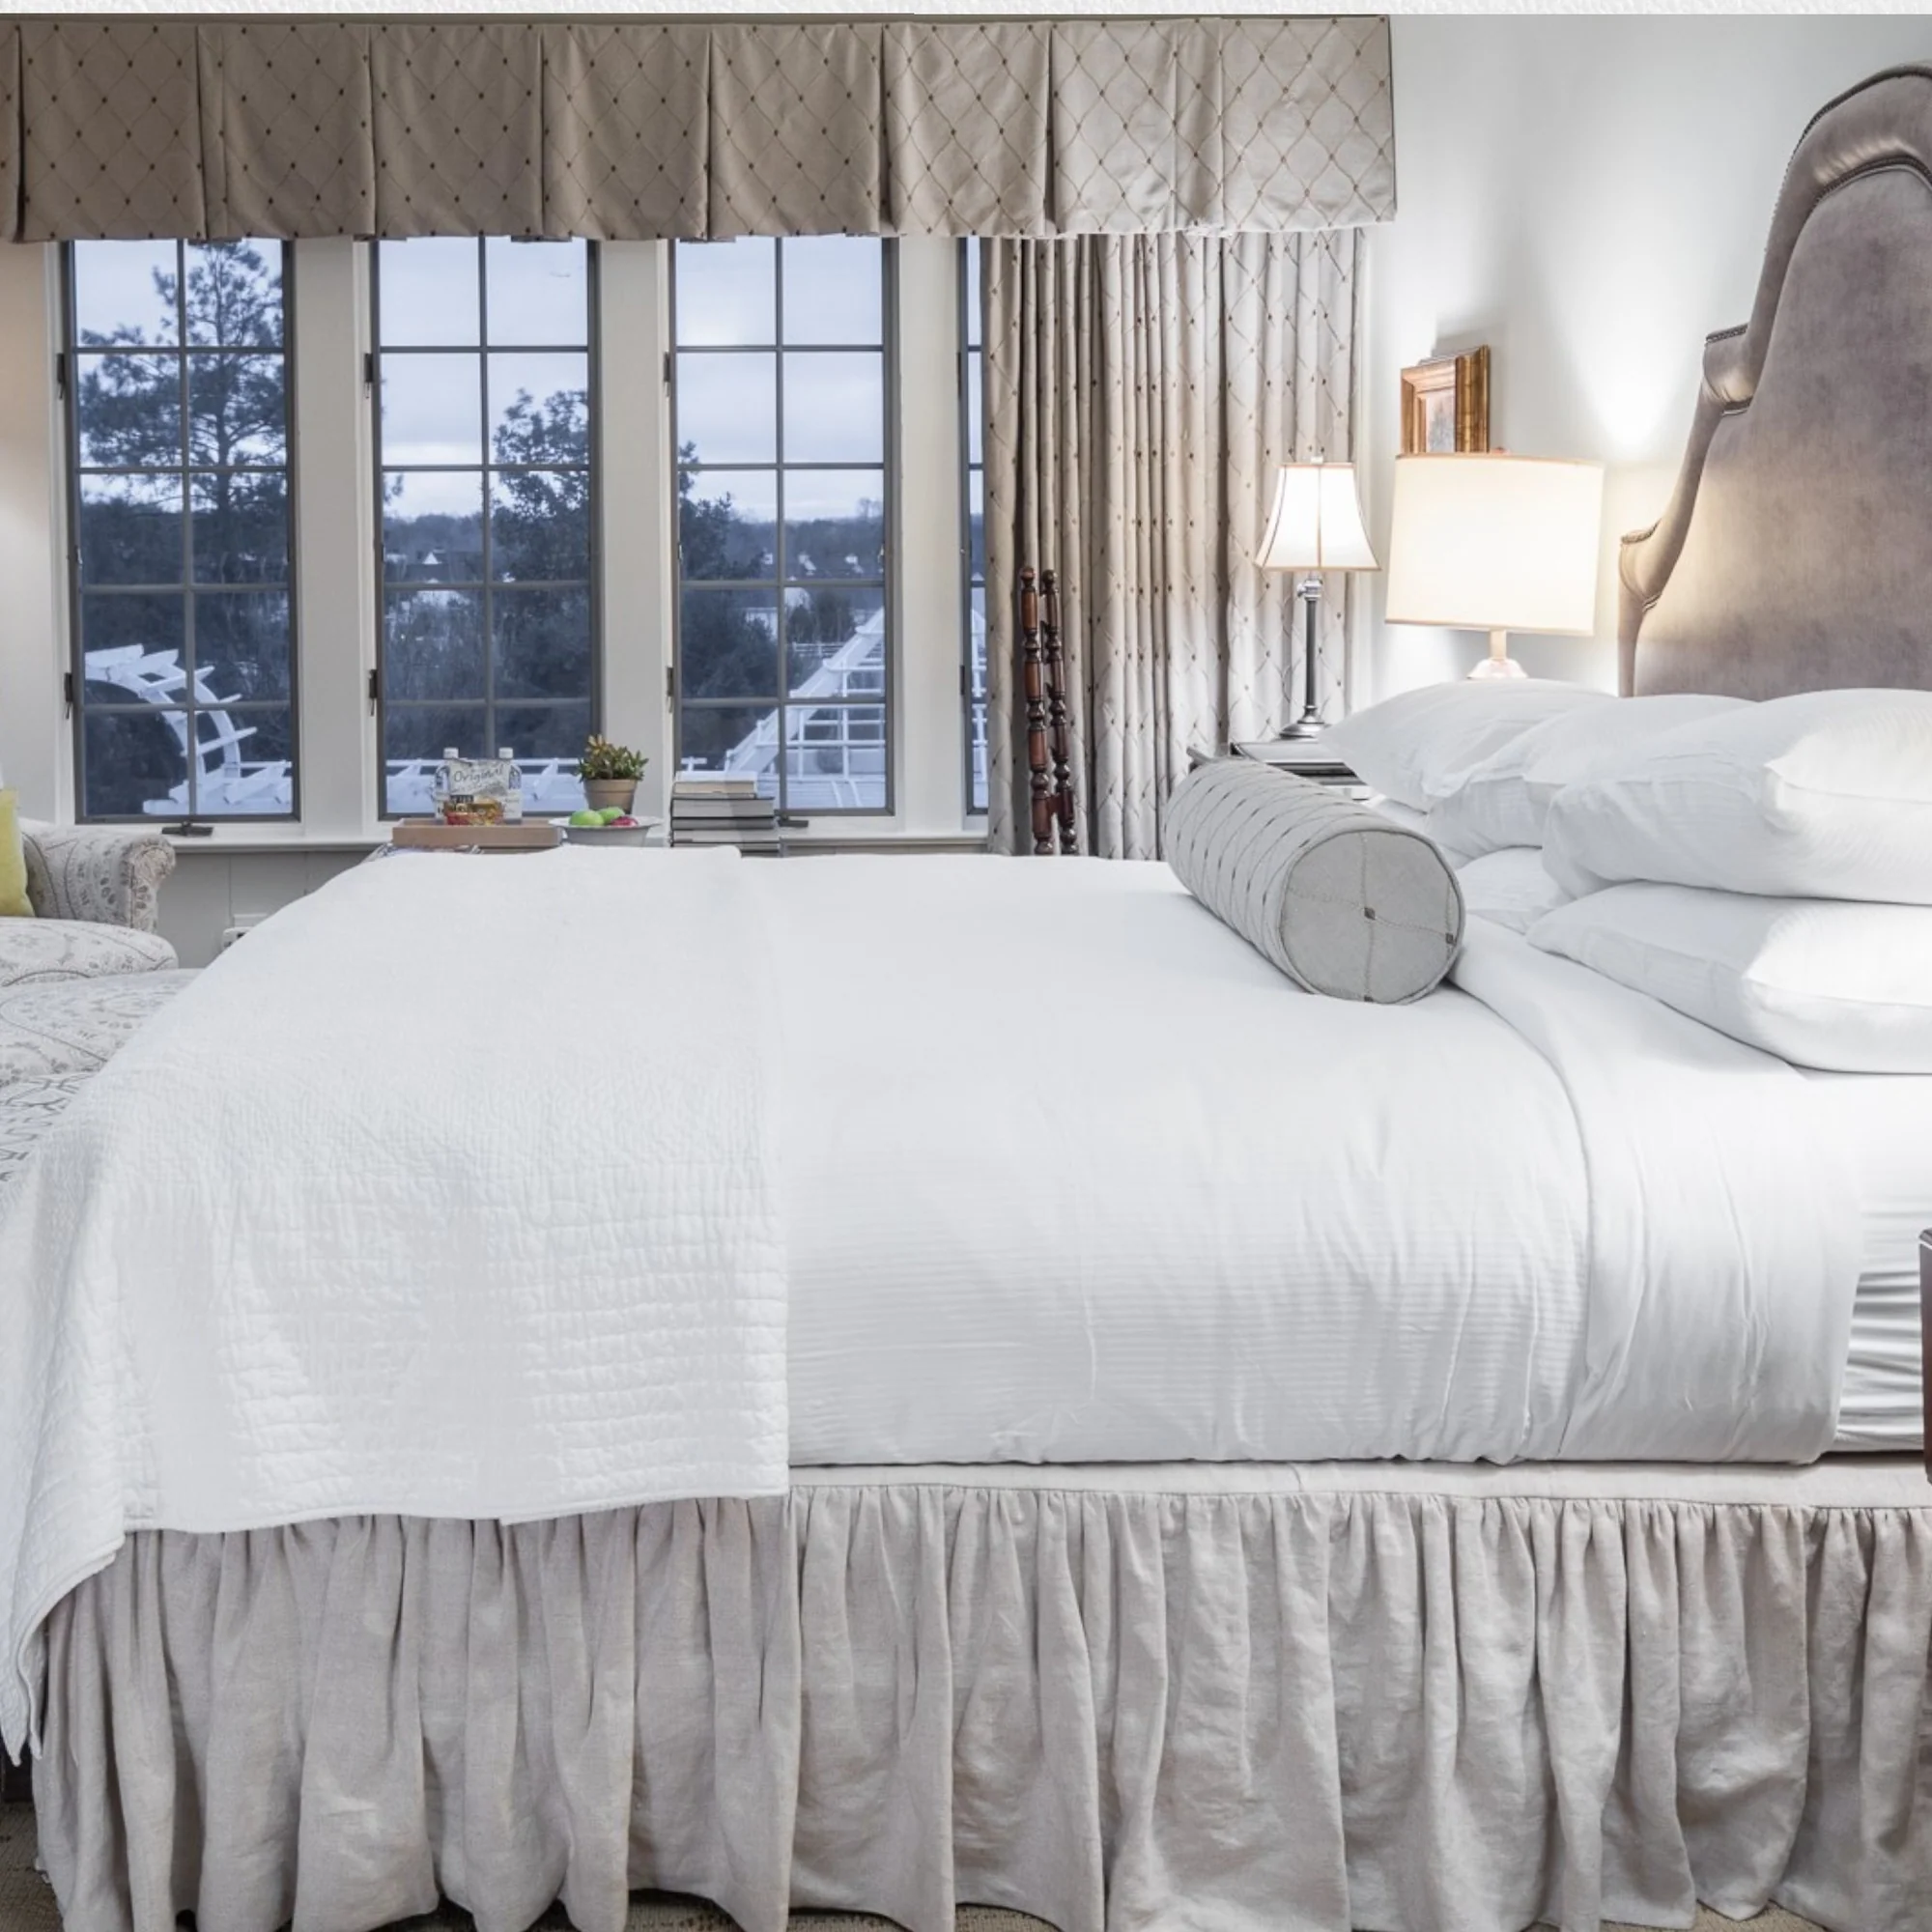 Bring Fearrington luxury home with you with our signature bedding collection